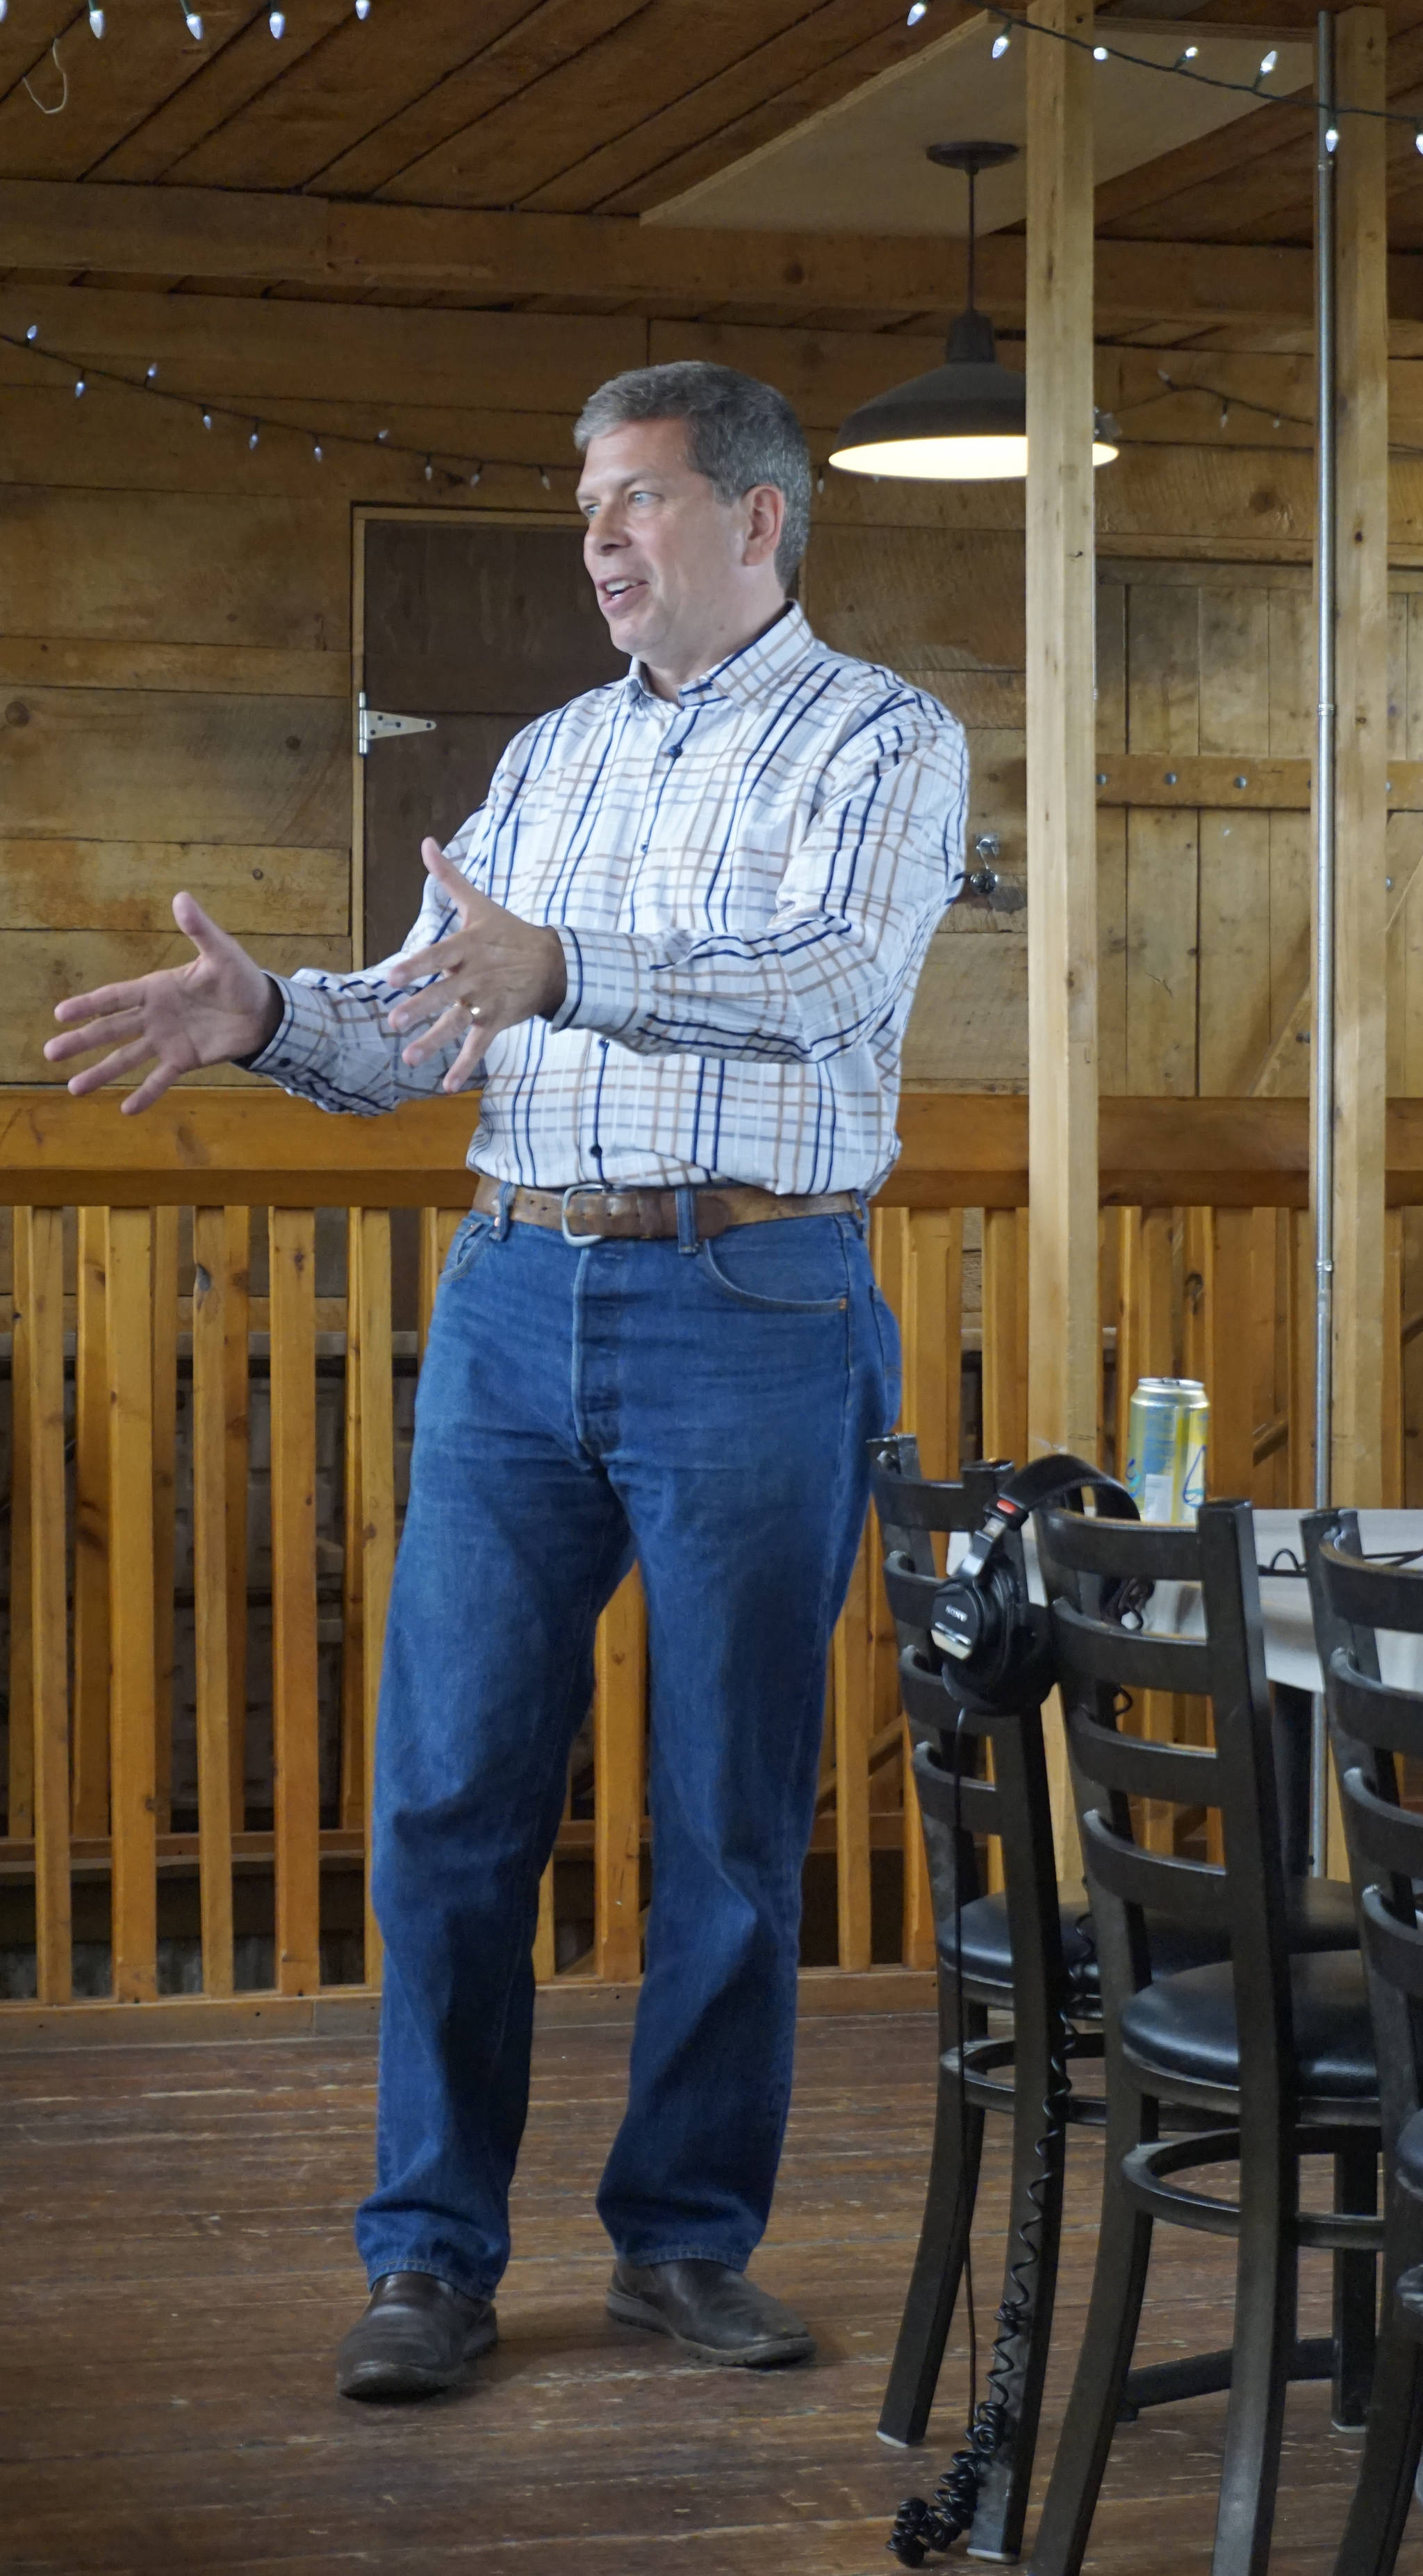 Mark Begich speaks to about 30 people last Thursday, July 26, 2018, at Alice’s Champagne Palace, Homer, Alaska. Begich, a former Anchorage mayor and U.S. Senator, is running for the Democratic Party nomination for governor. (Photo by Michael Armstrong/Homer News)